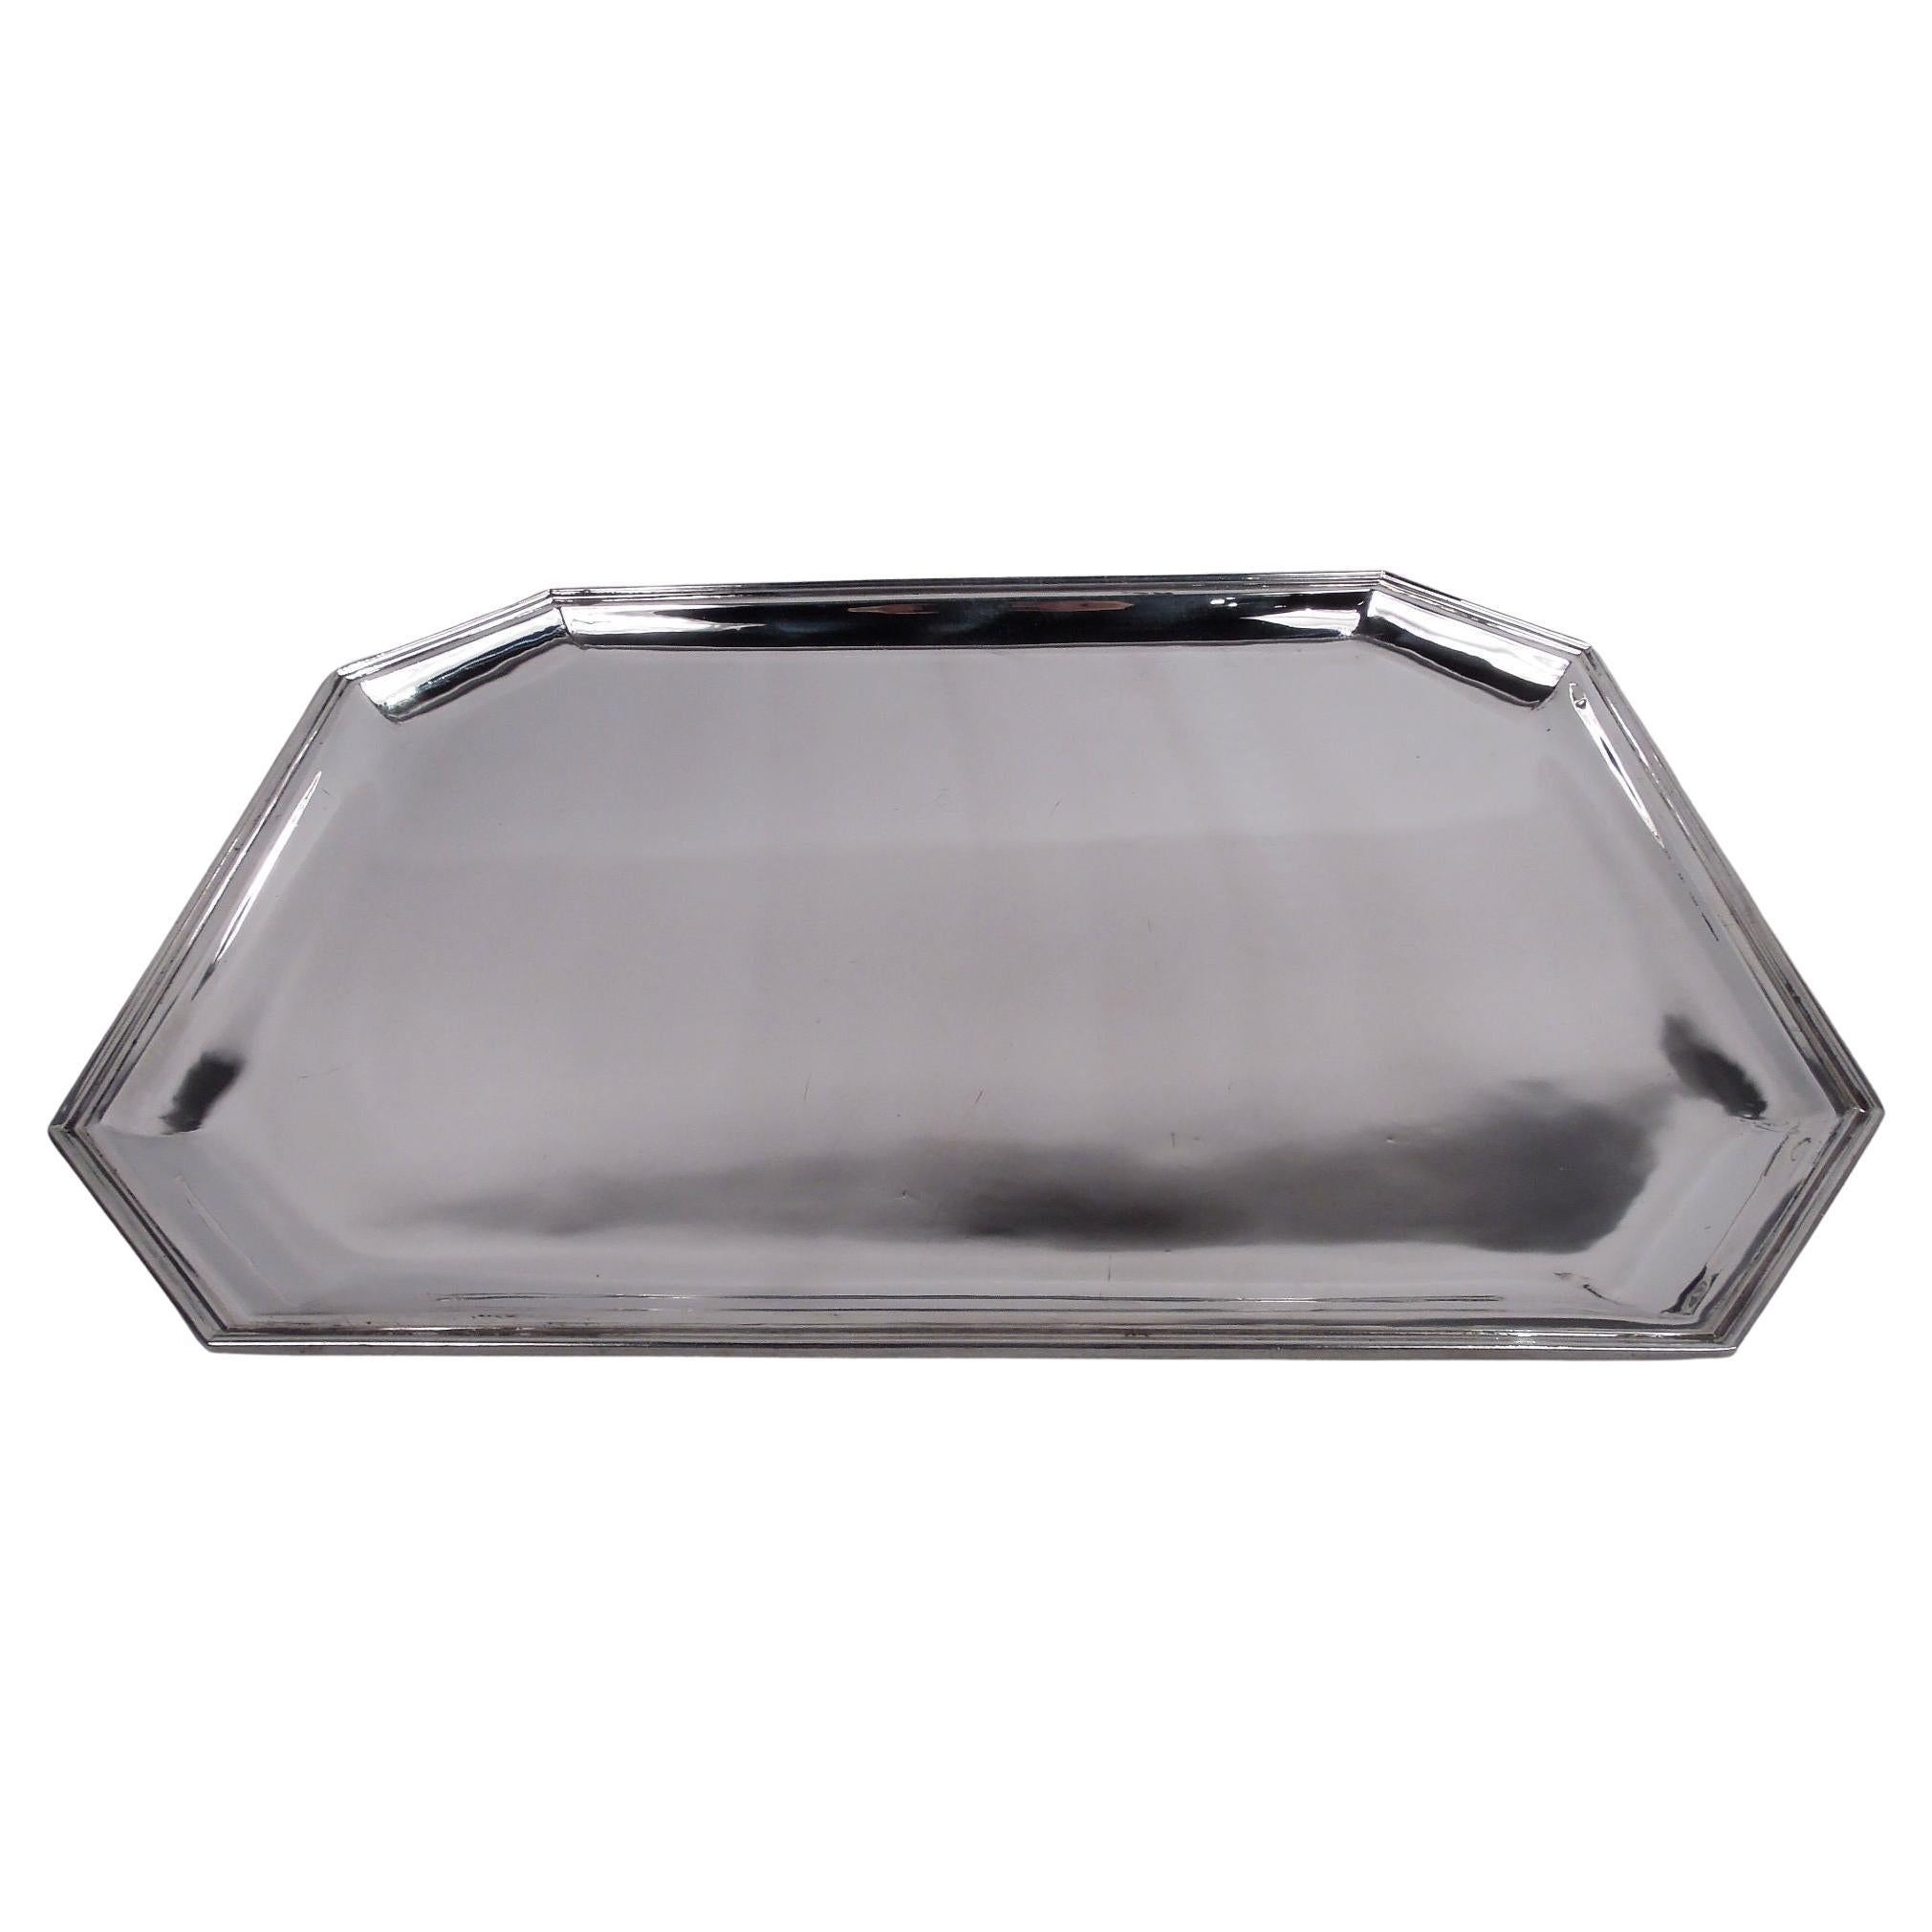 Cartier American Art Deco Sterling Silver Tray C 1925 For Sale